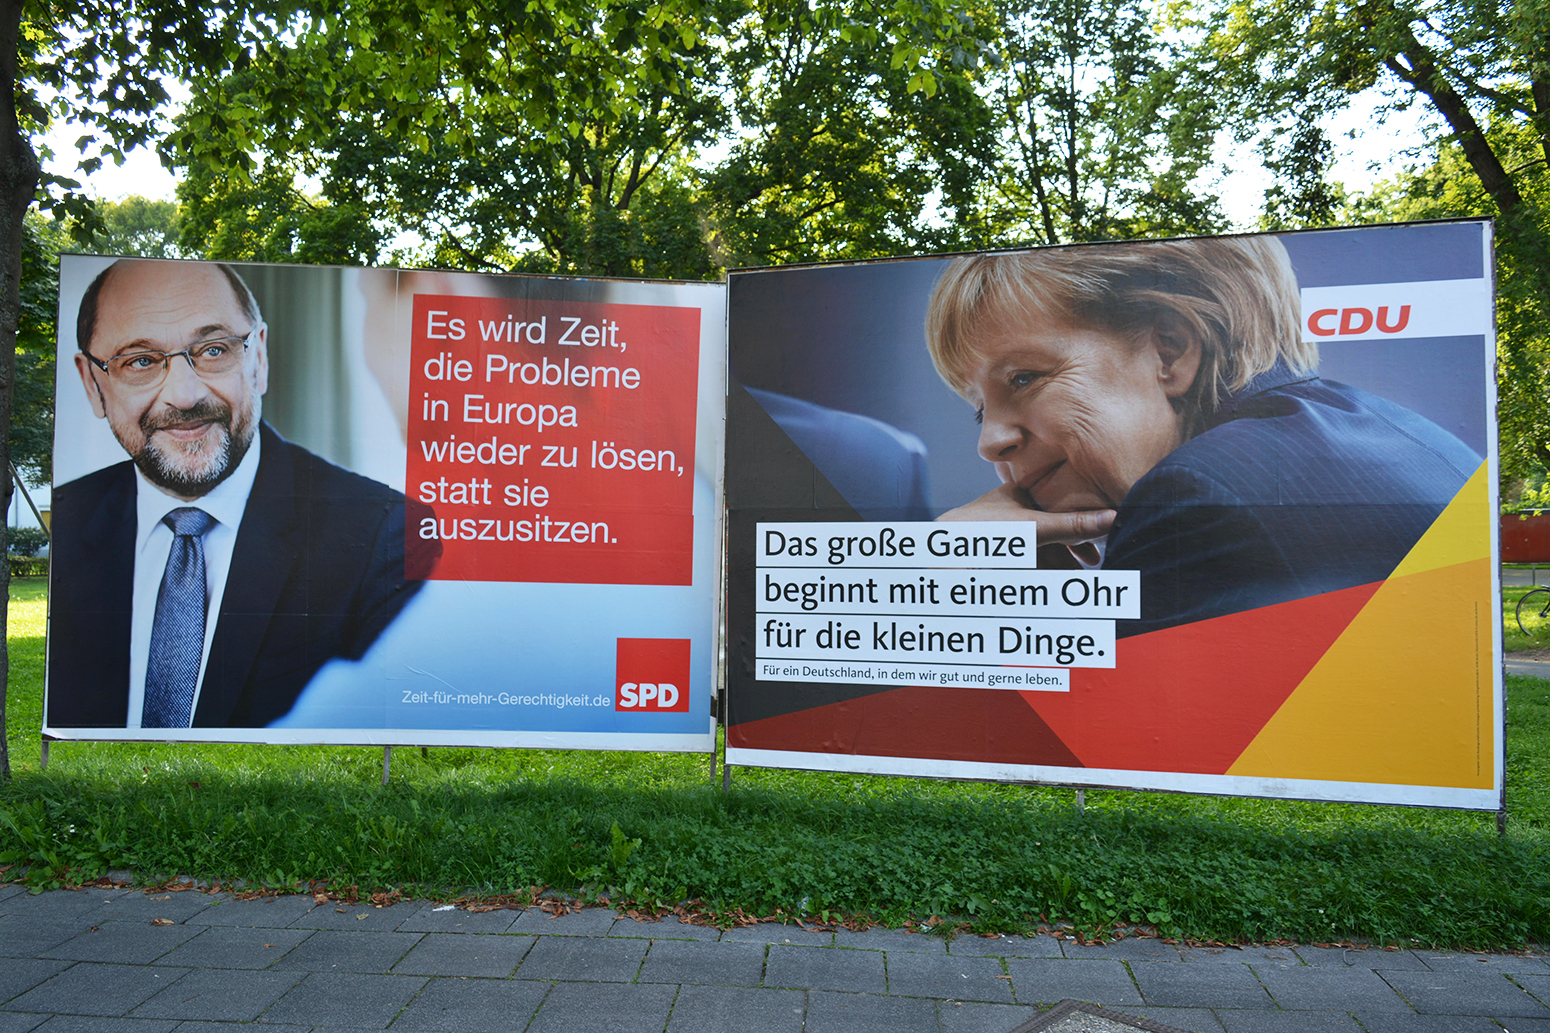 Two rival adverts for candidates in Germany's 2017 election